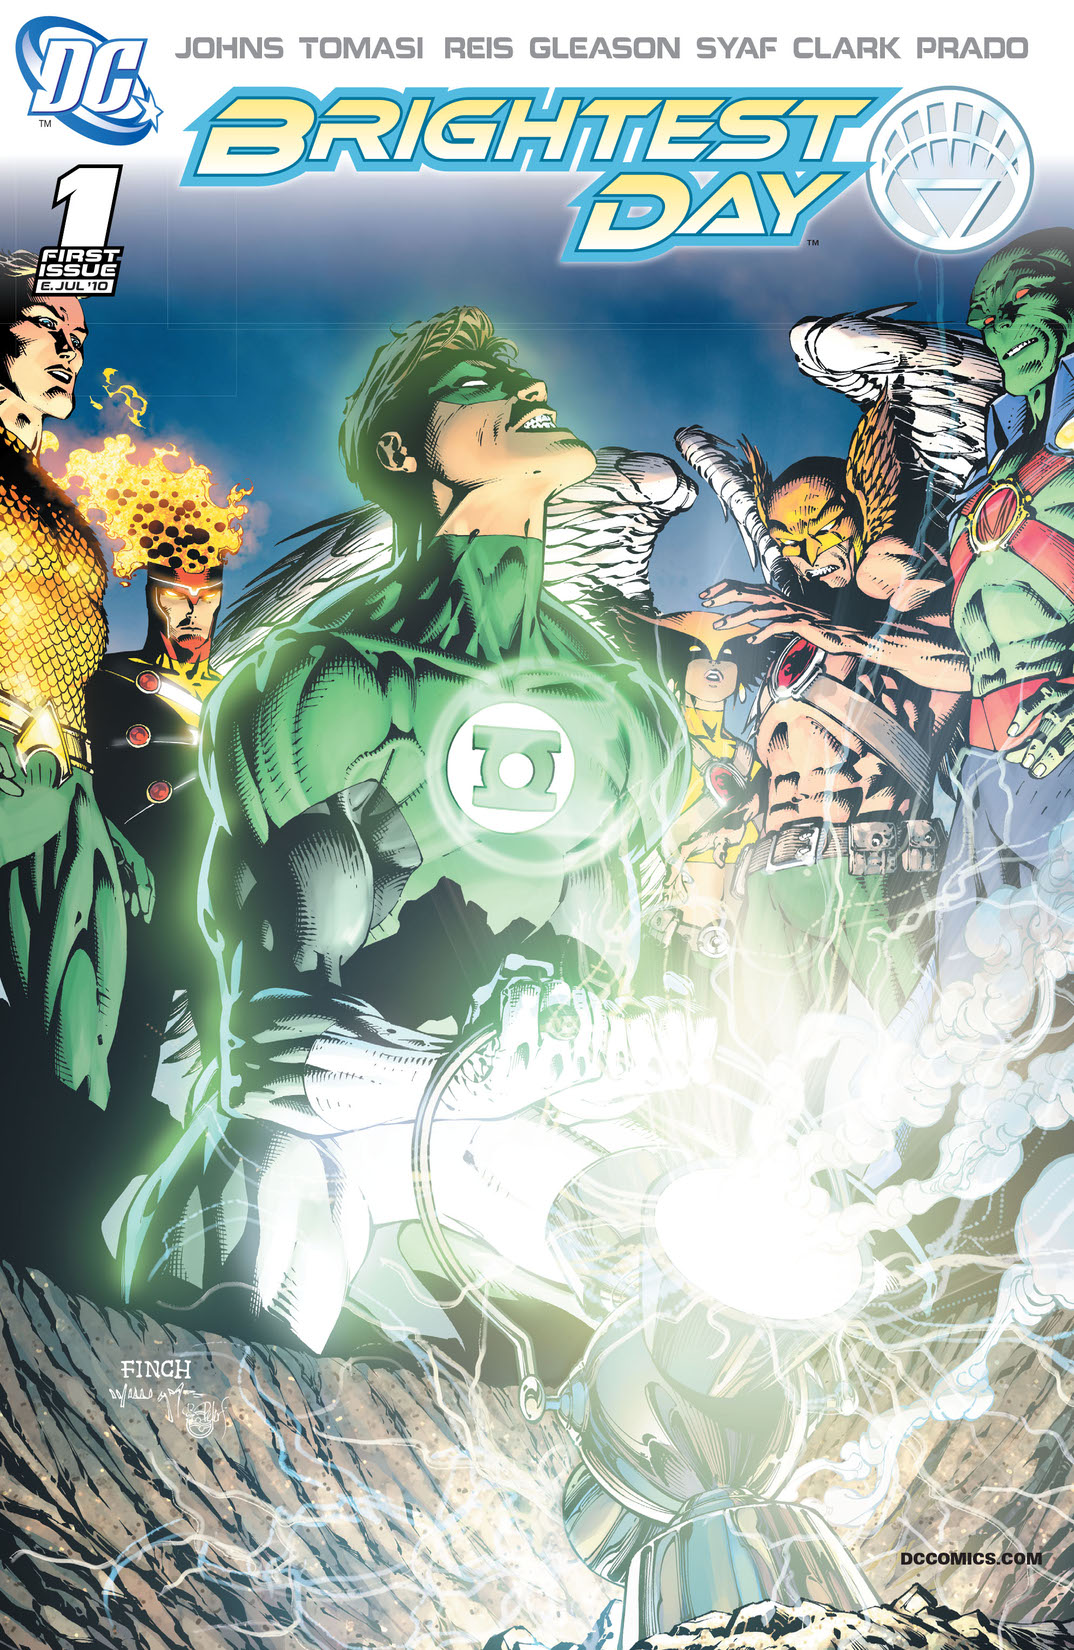 Brightest Day #1 preview images